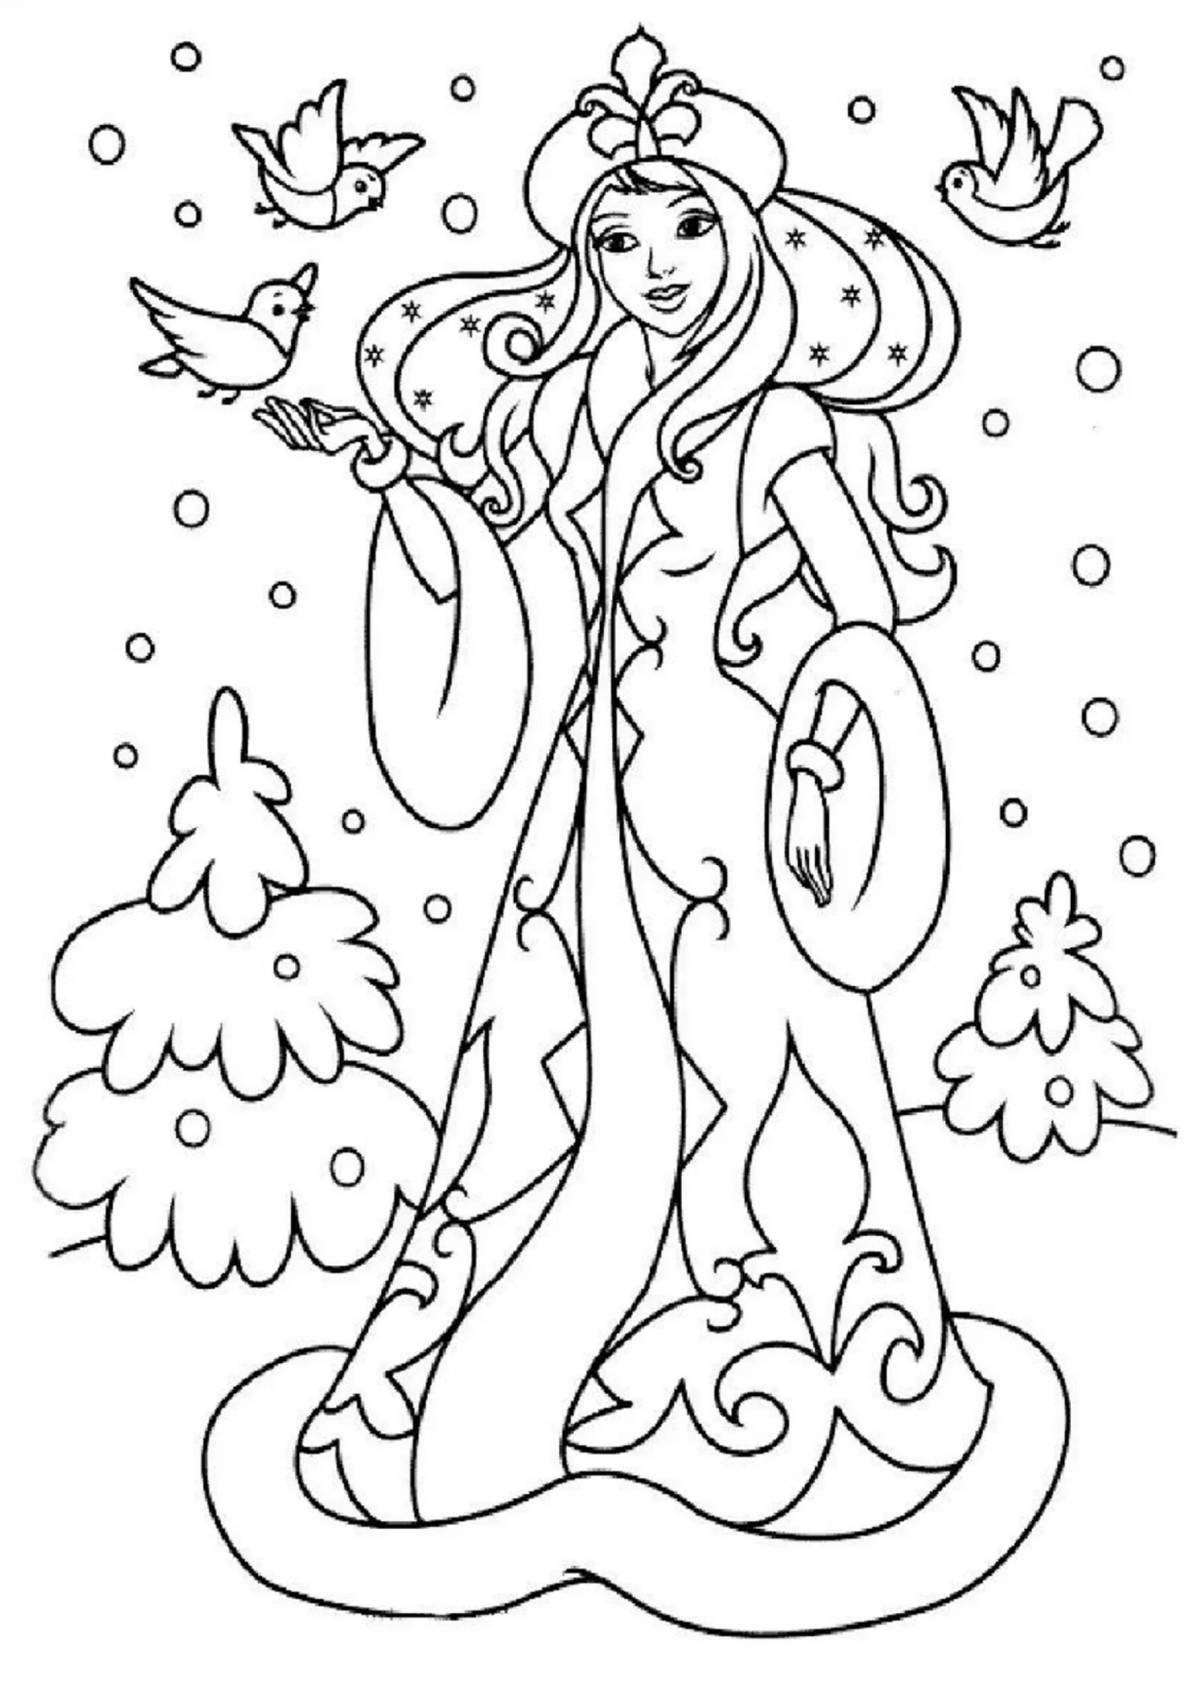 Playful coloring drawing of a snow maiden